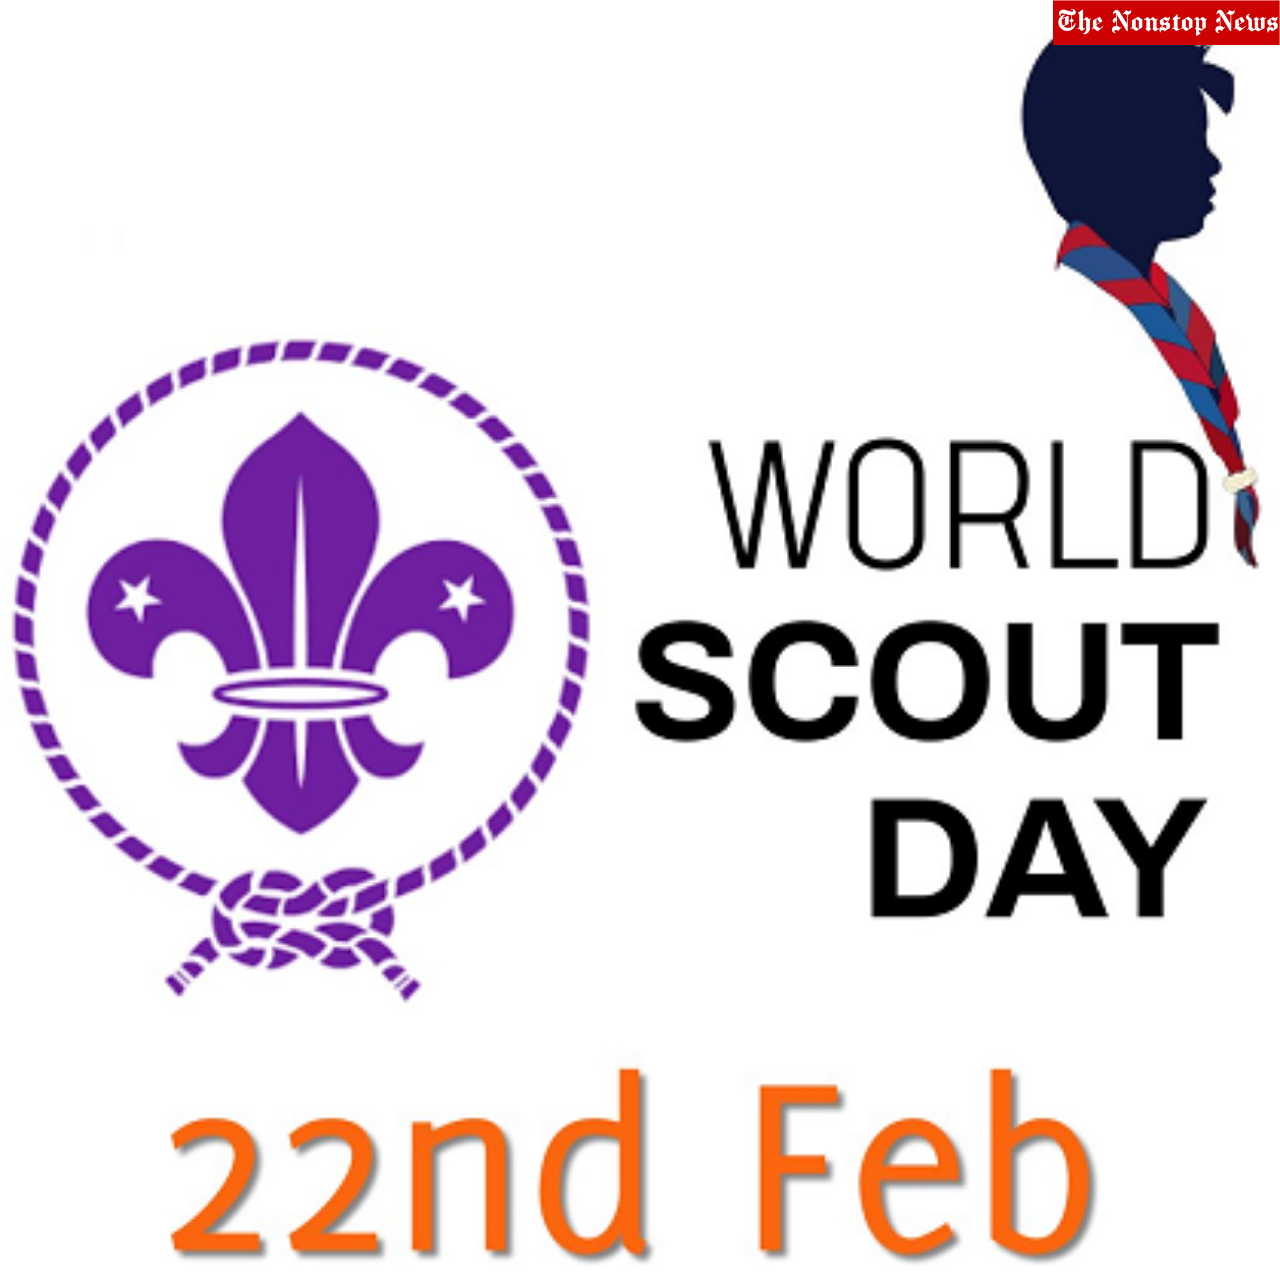 World Scout Day 2022 Quotes, HD Images, Messages, Posters, Banners to Share